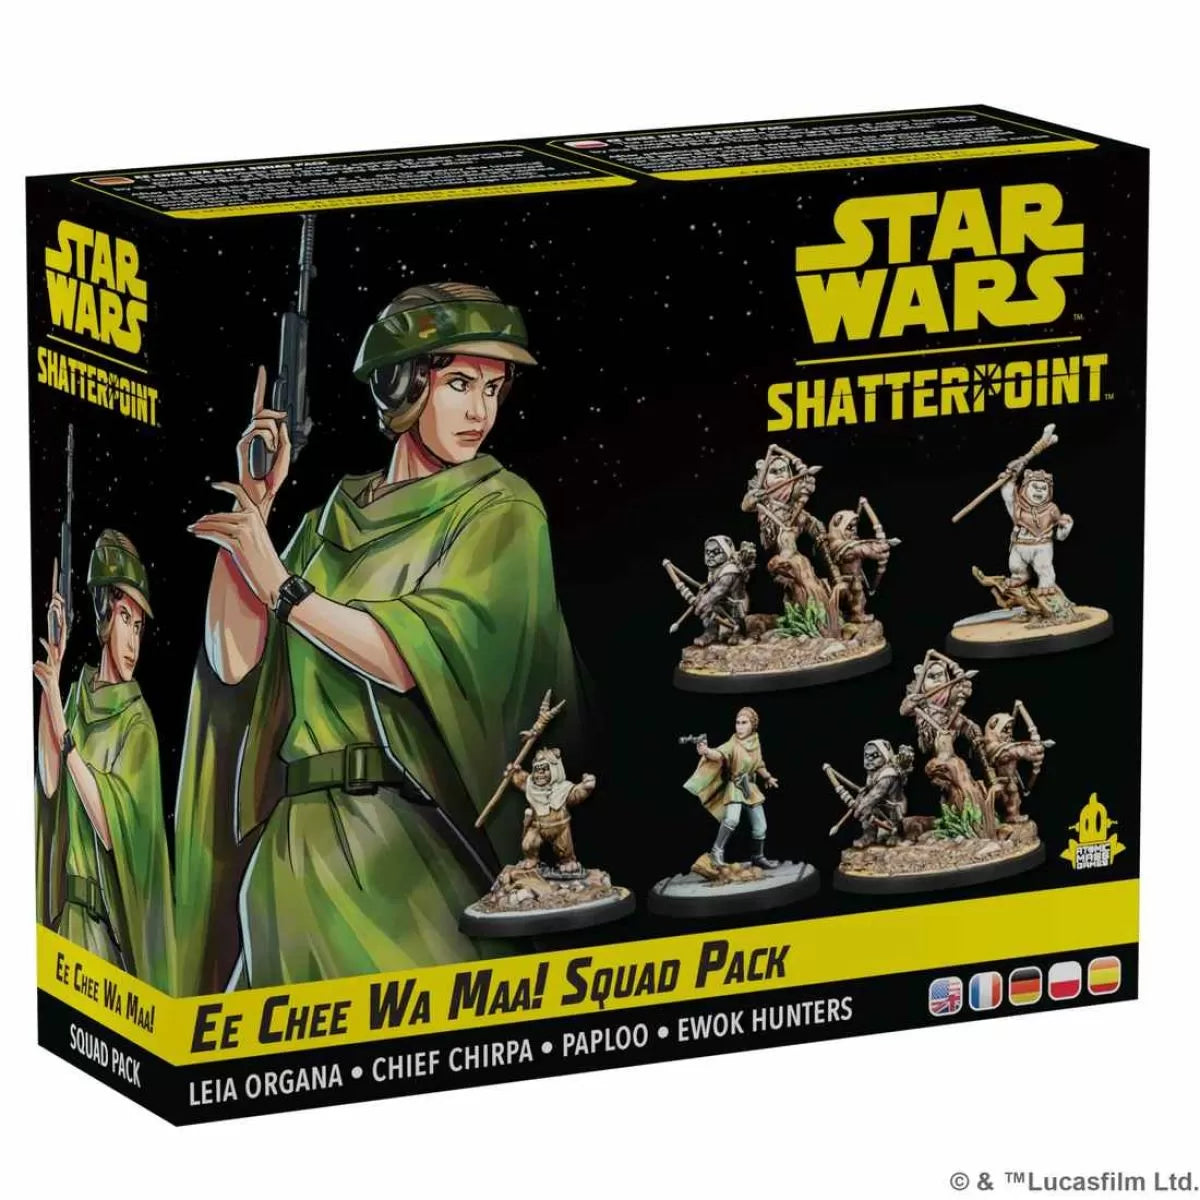 Star Wars Shatterpoint: Ee Chee Wa Maa! Leia Organa Squad Pack